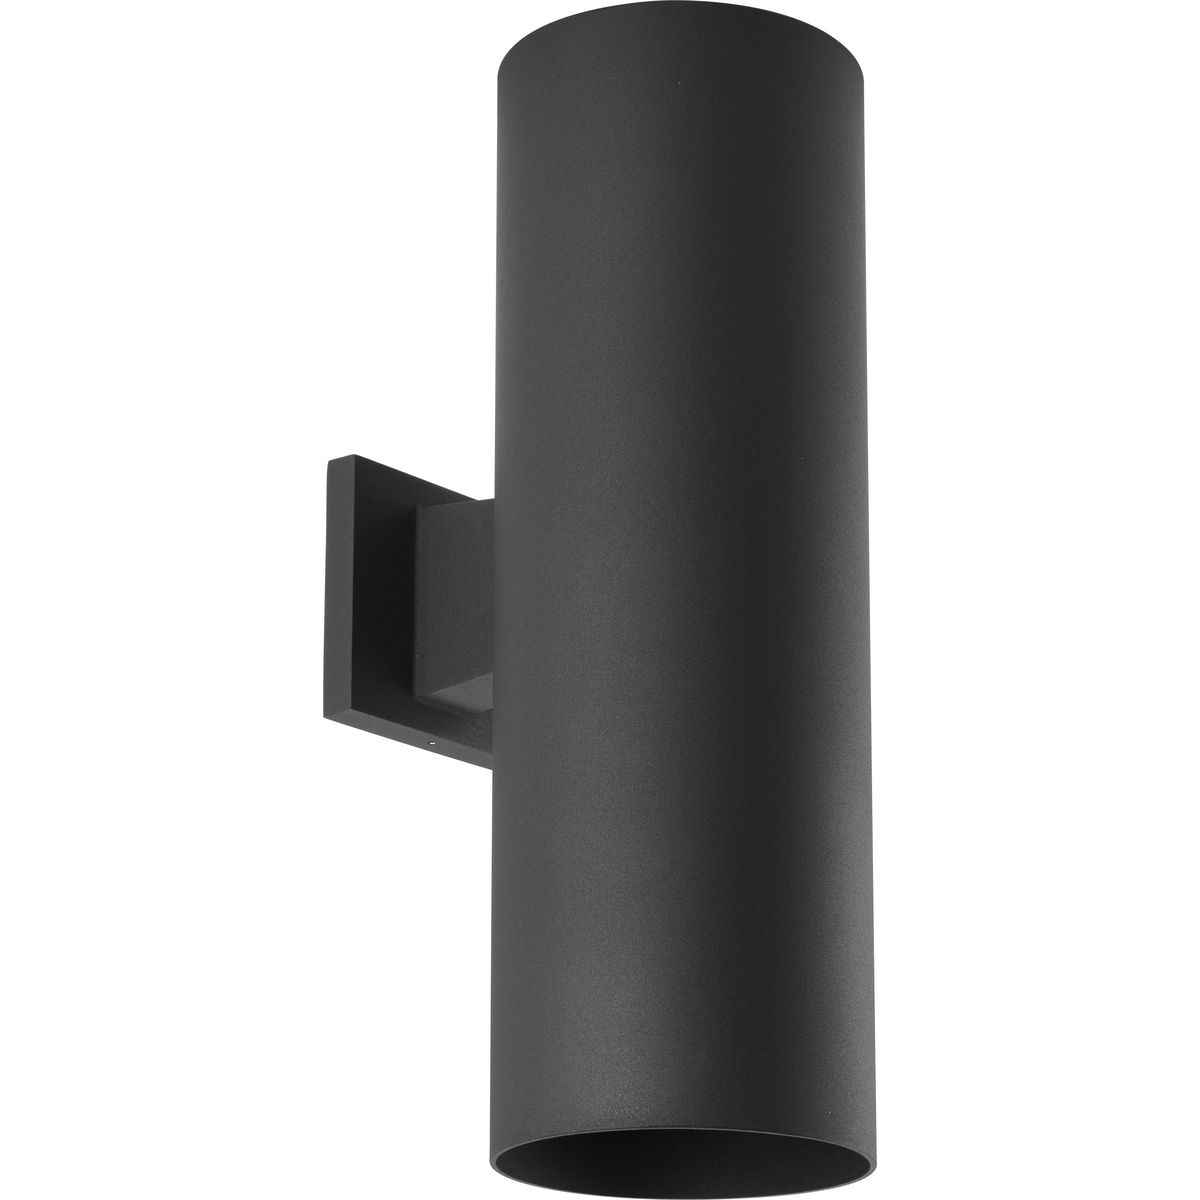 6" LED Outdoor Up/Down Modern Black Wall Cylinder with Glass Top Lens - Wet Location Listed